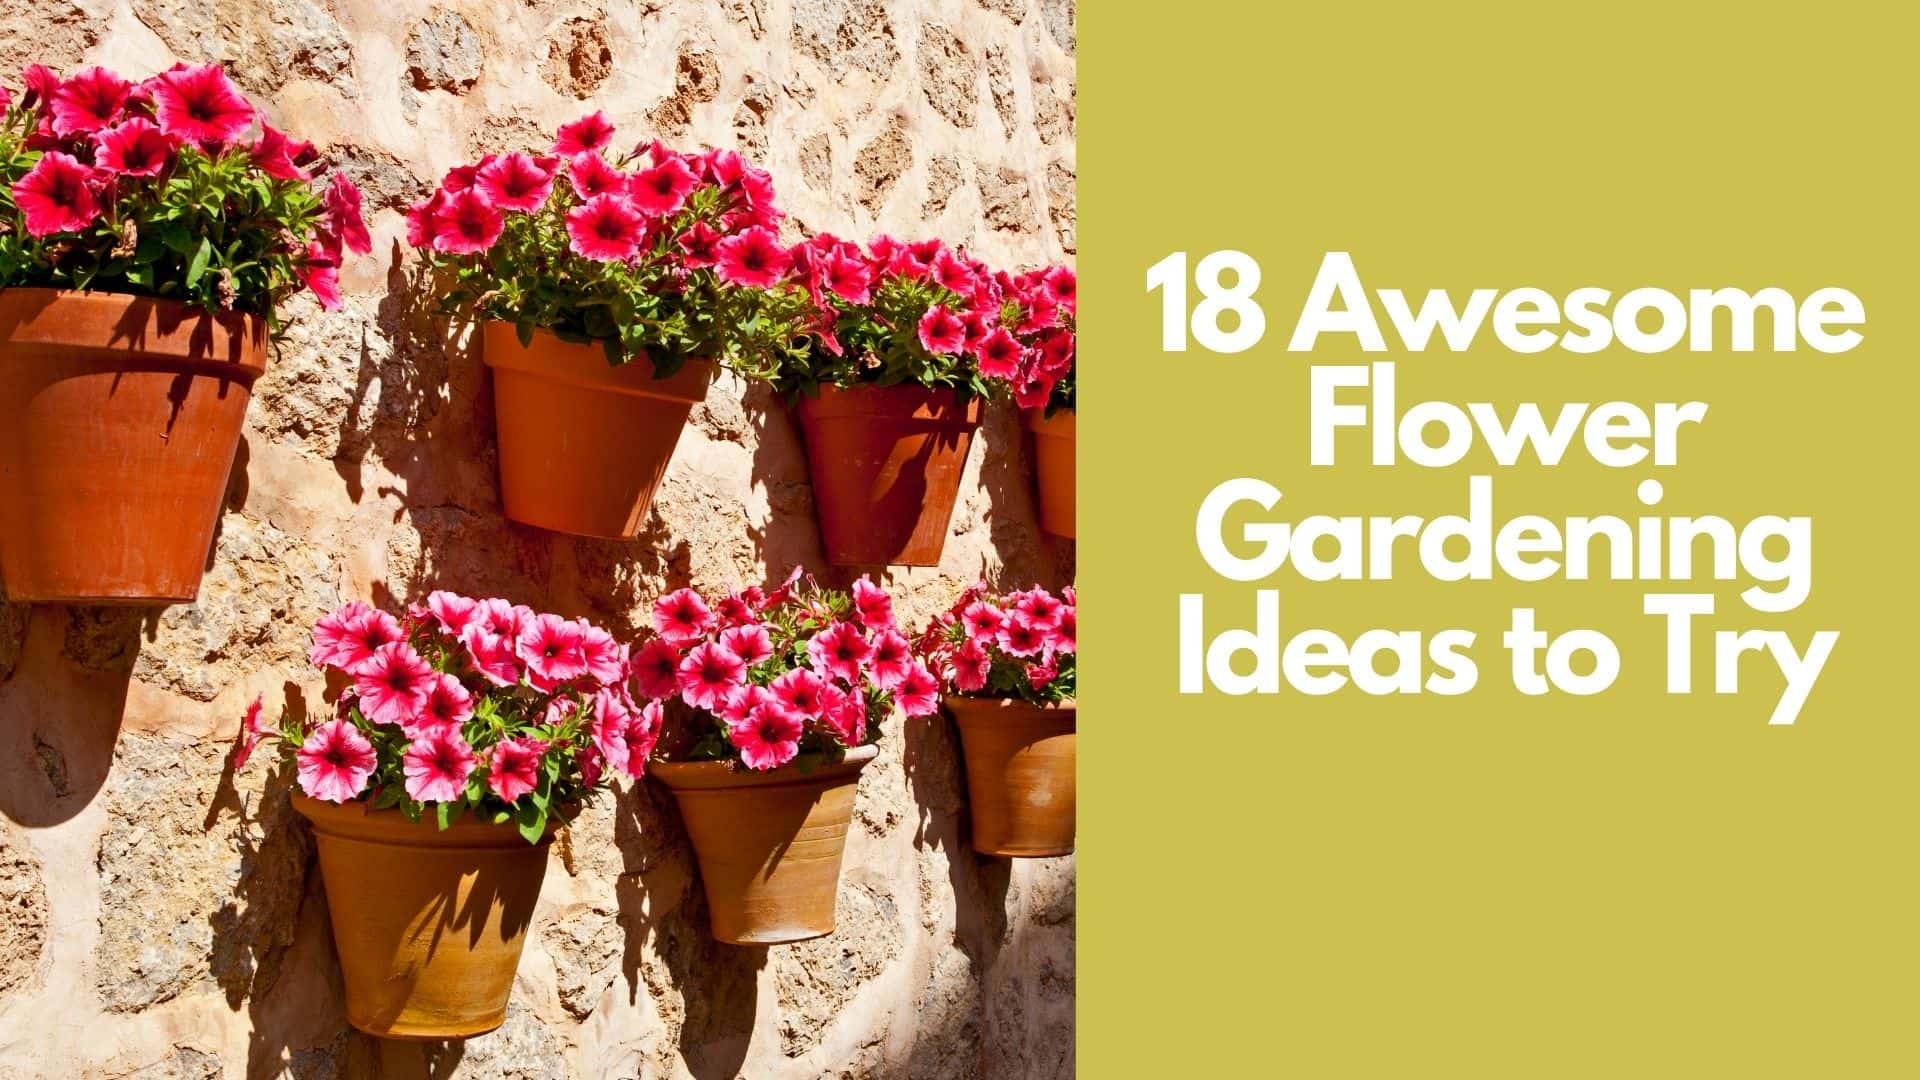 18 Awesome Flower Gardening Ideas to Try